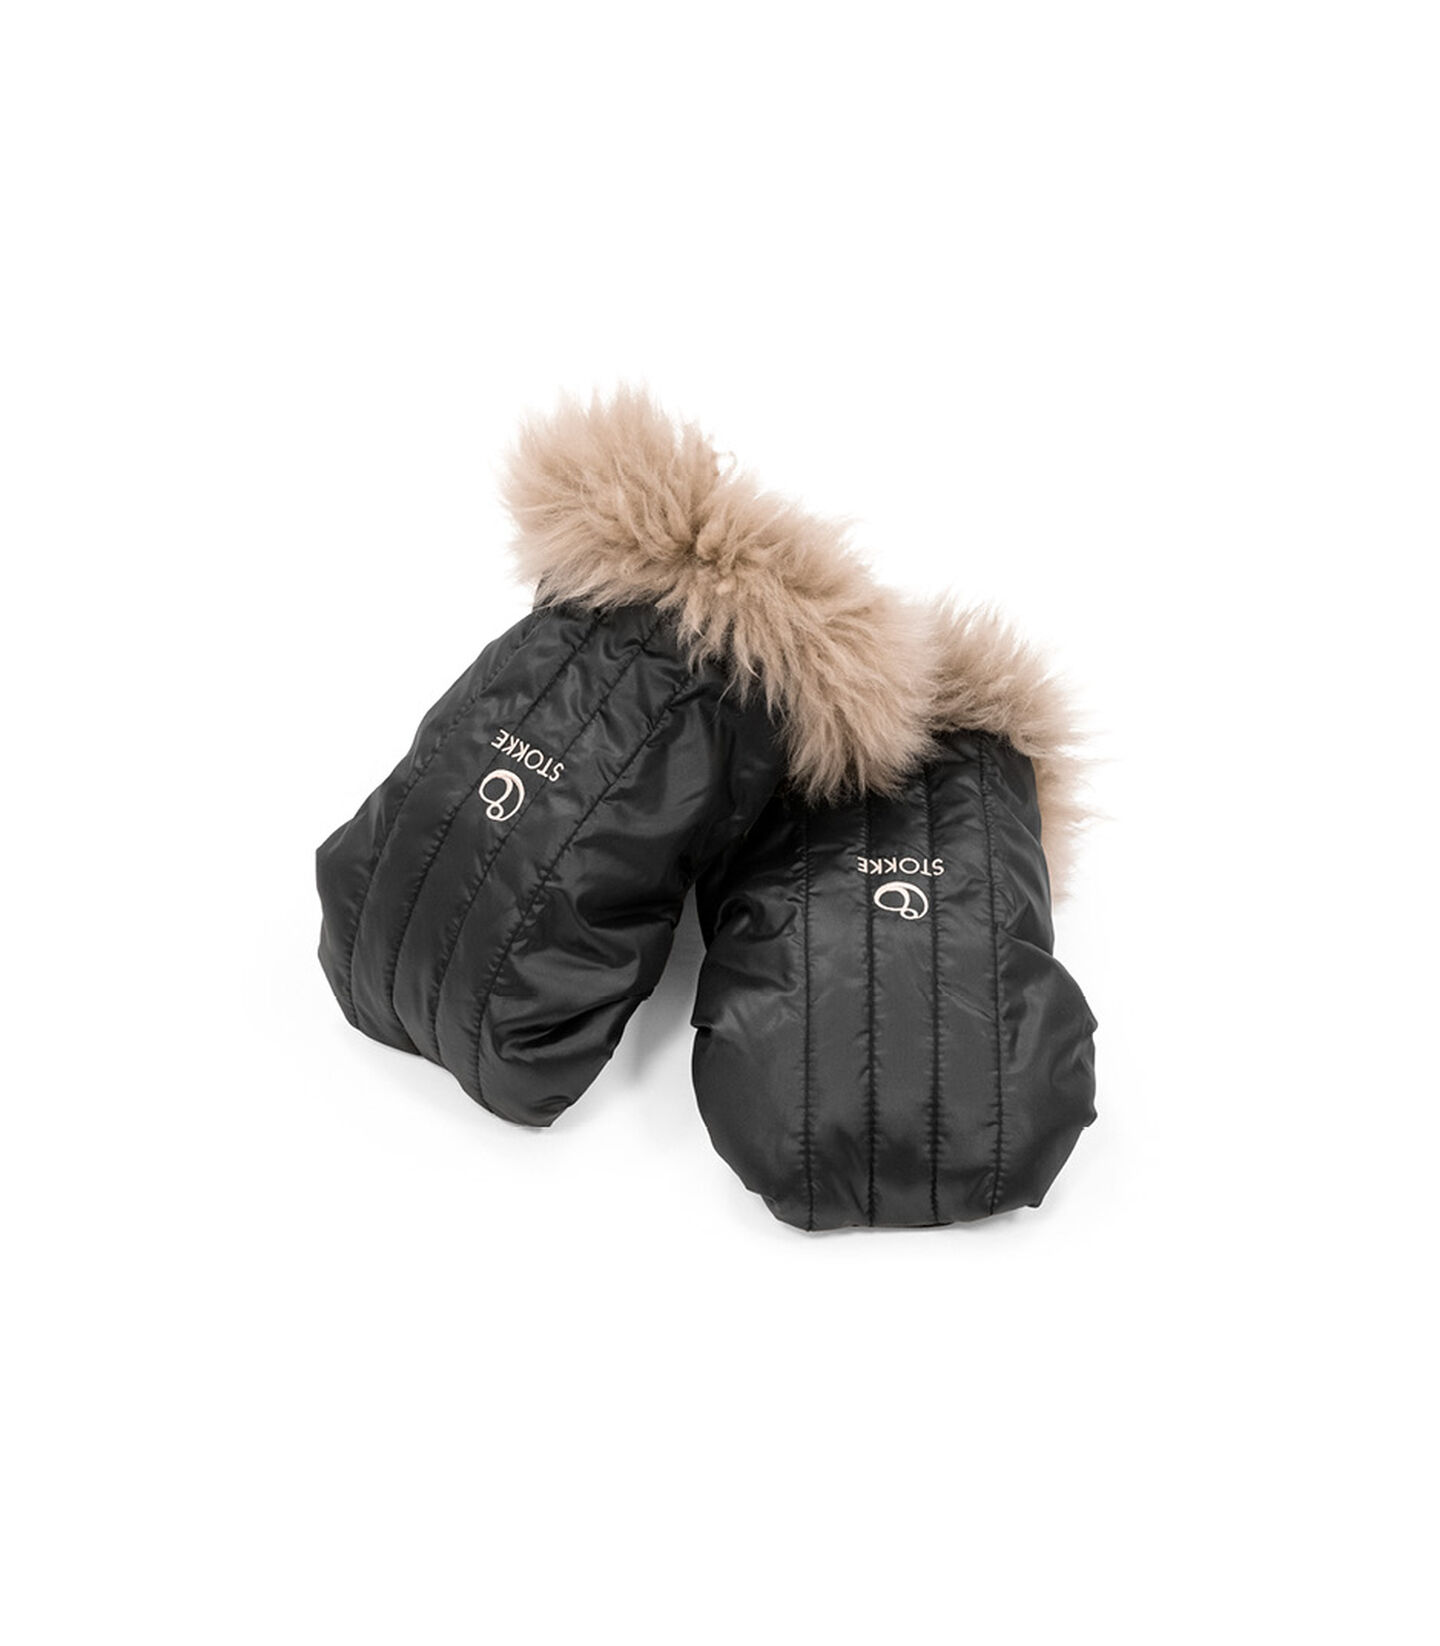 Stokke® Stroller Mittens Onyx Black, 瑪瑙黑色, mainview view 1